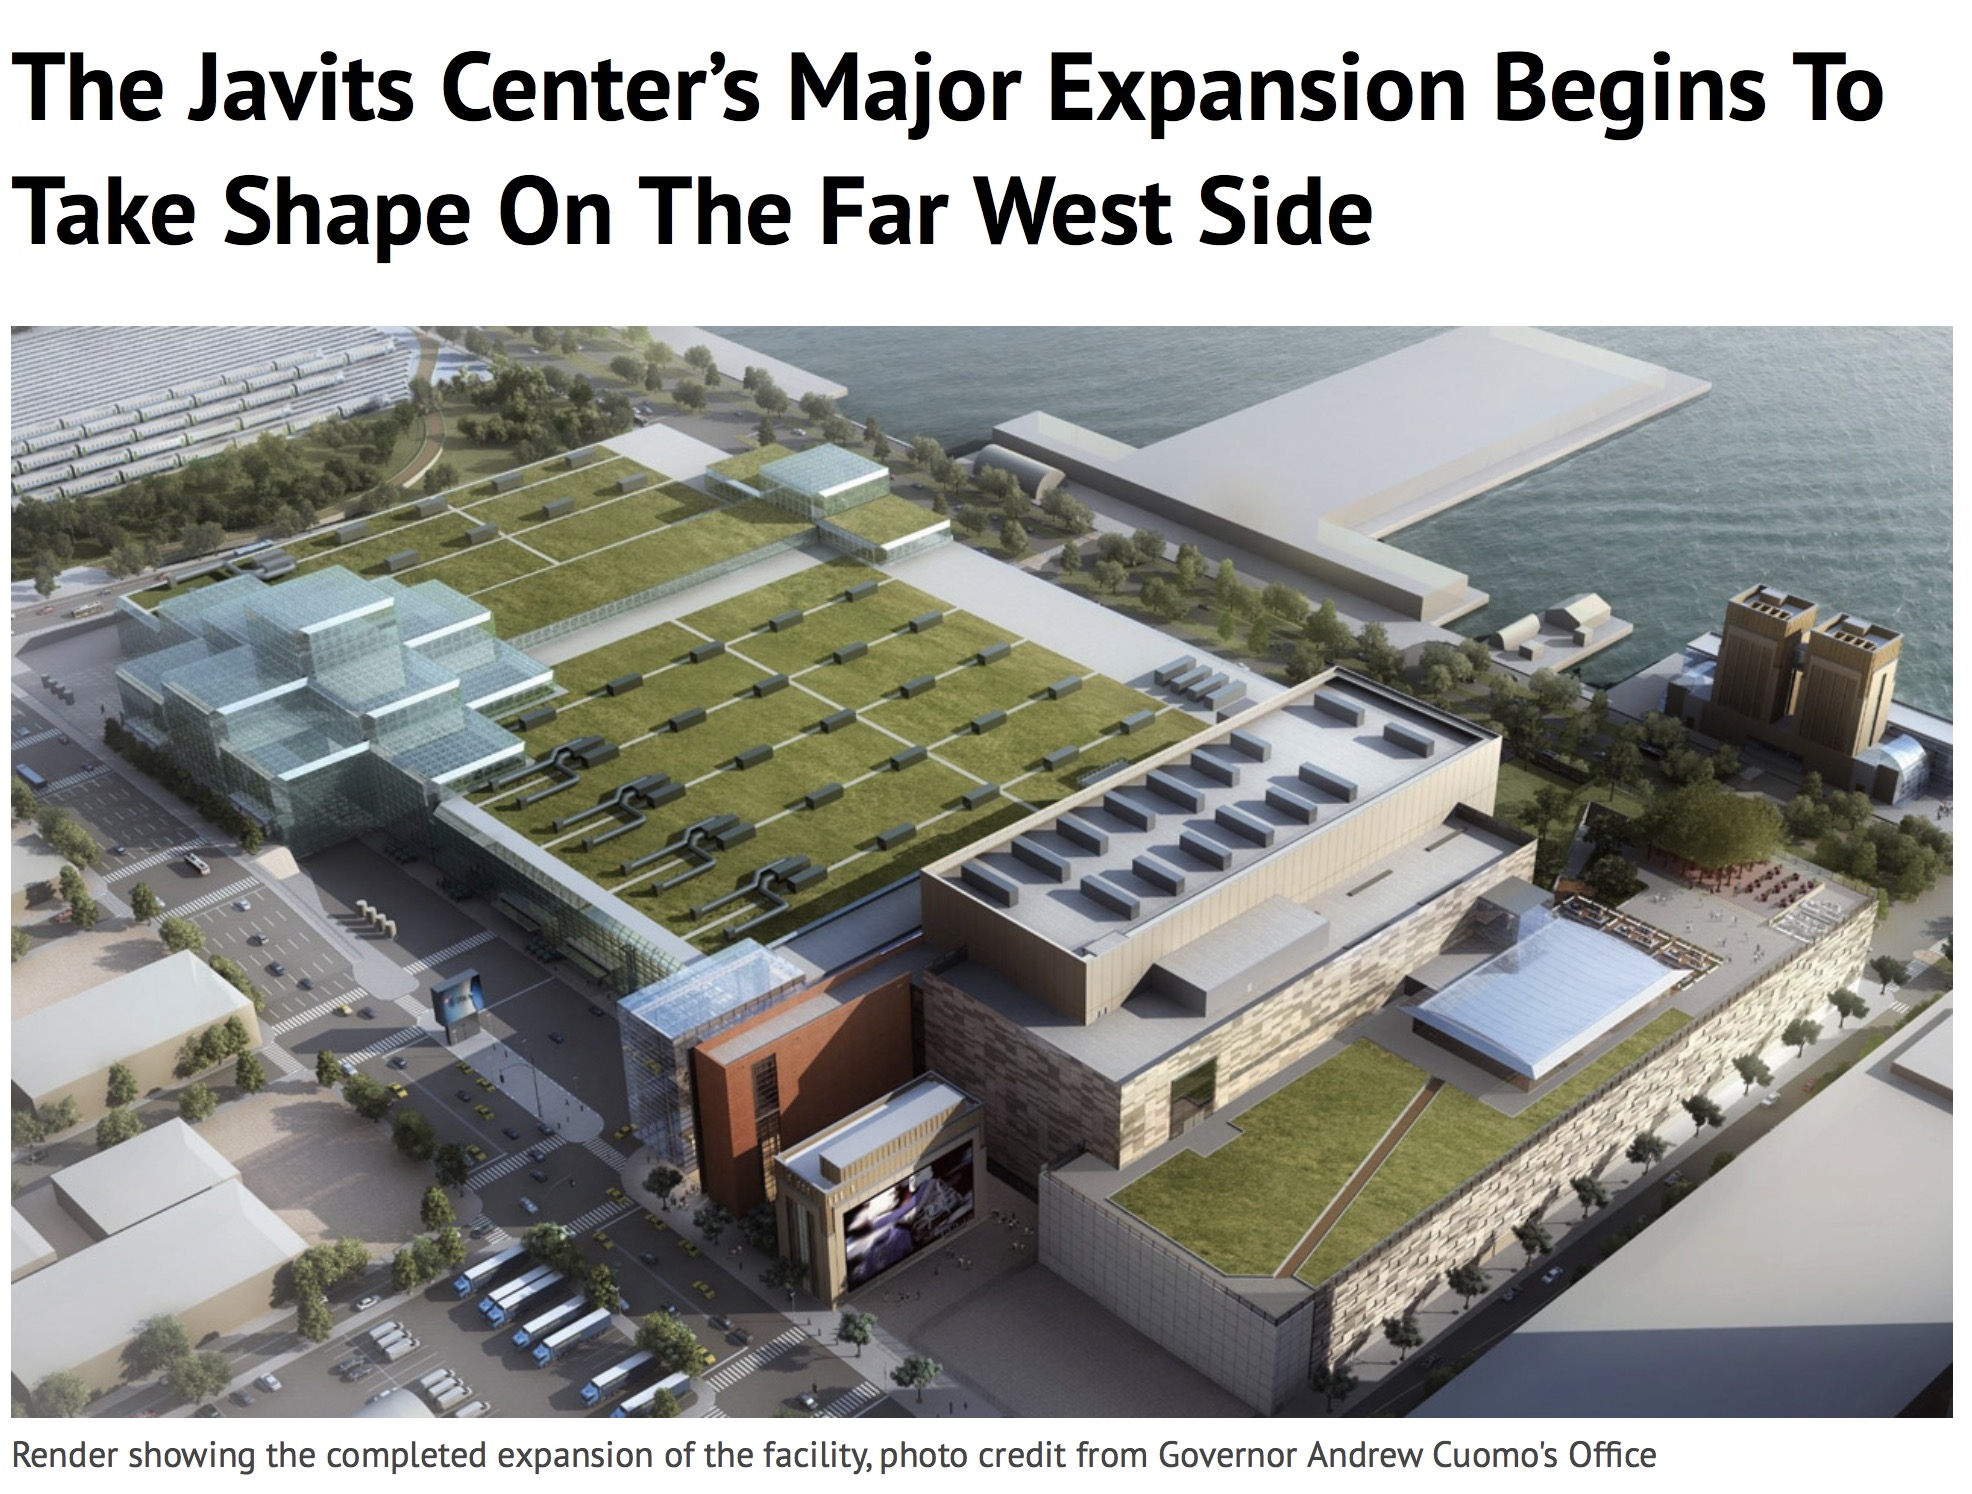 Article on EXPANSION of JAVITS Center the Home of NYCC well worth a read and exciting future for NYCC